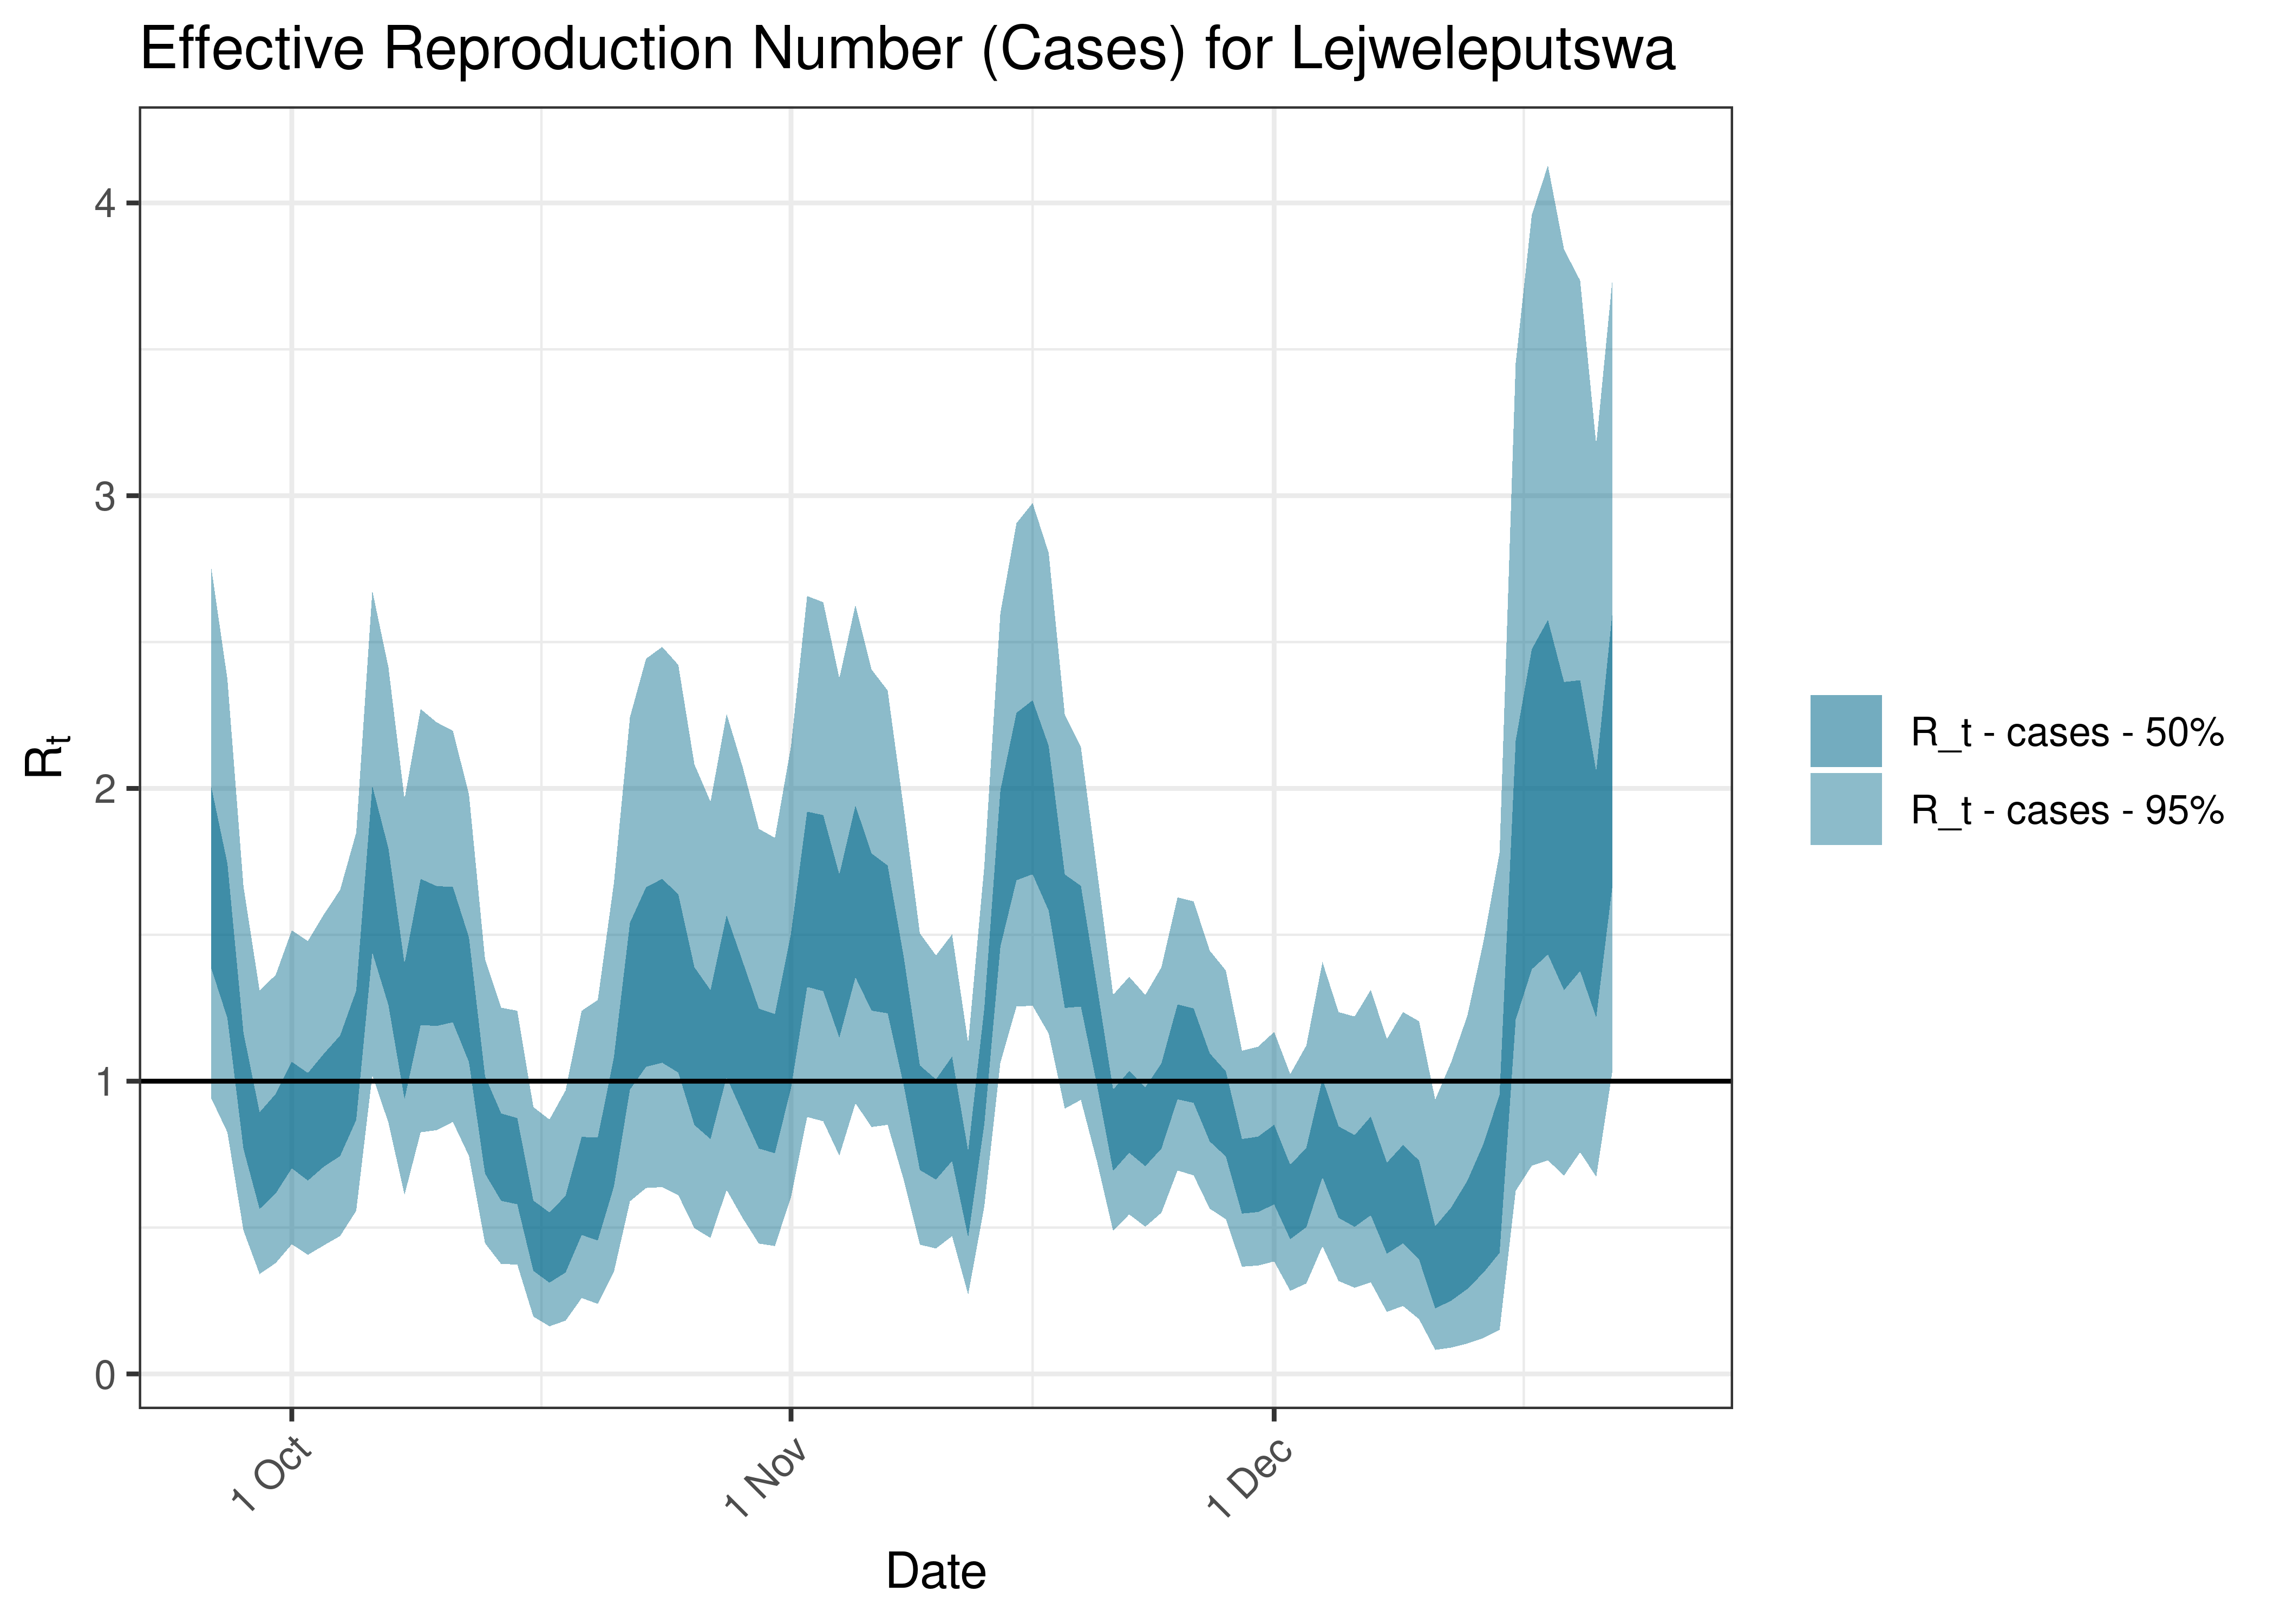 Estimated Effective Reproduction Number Based on Cases for Lejweleputswa over last 90 days